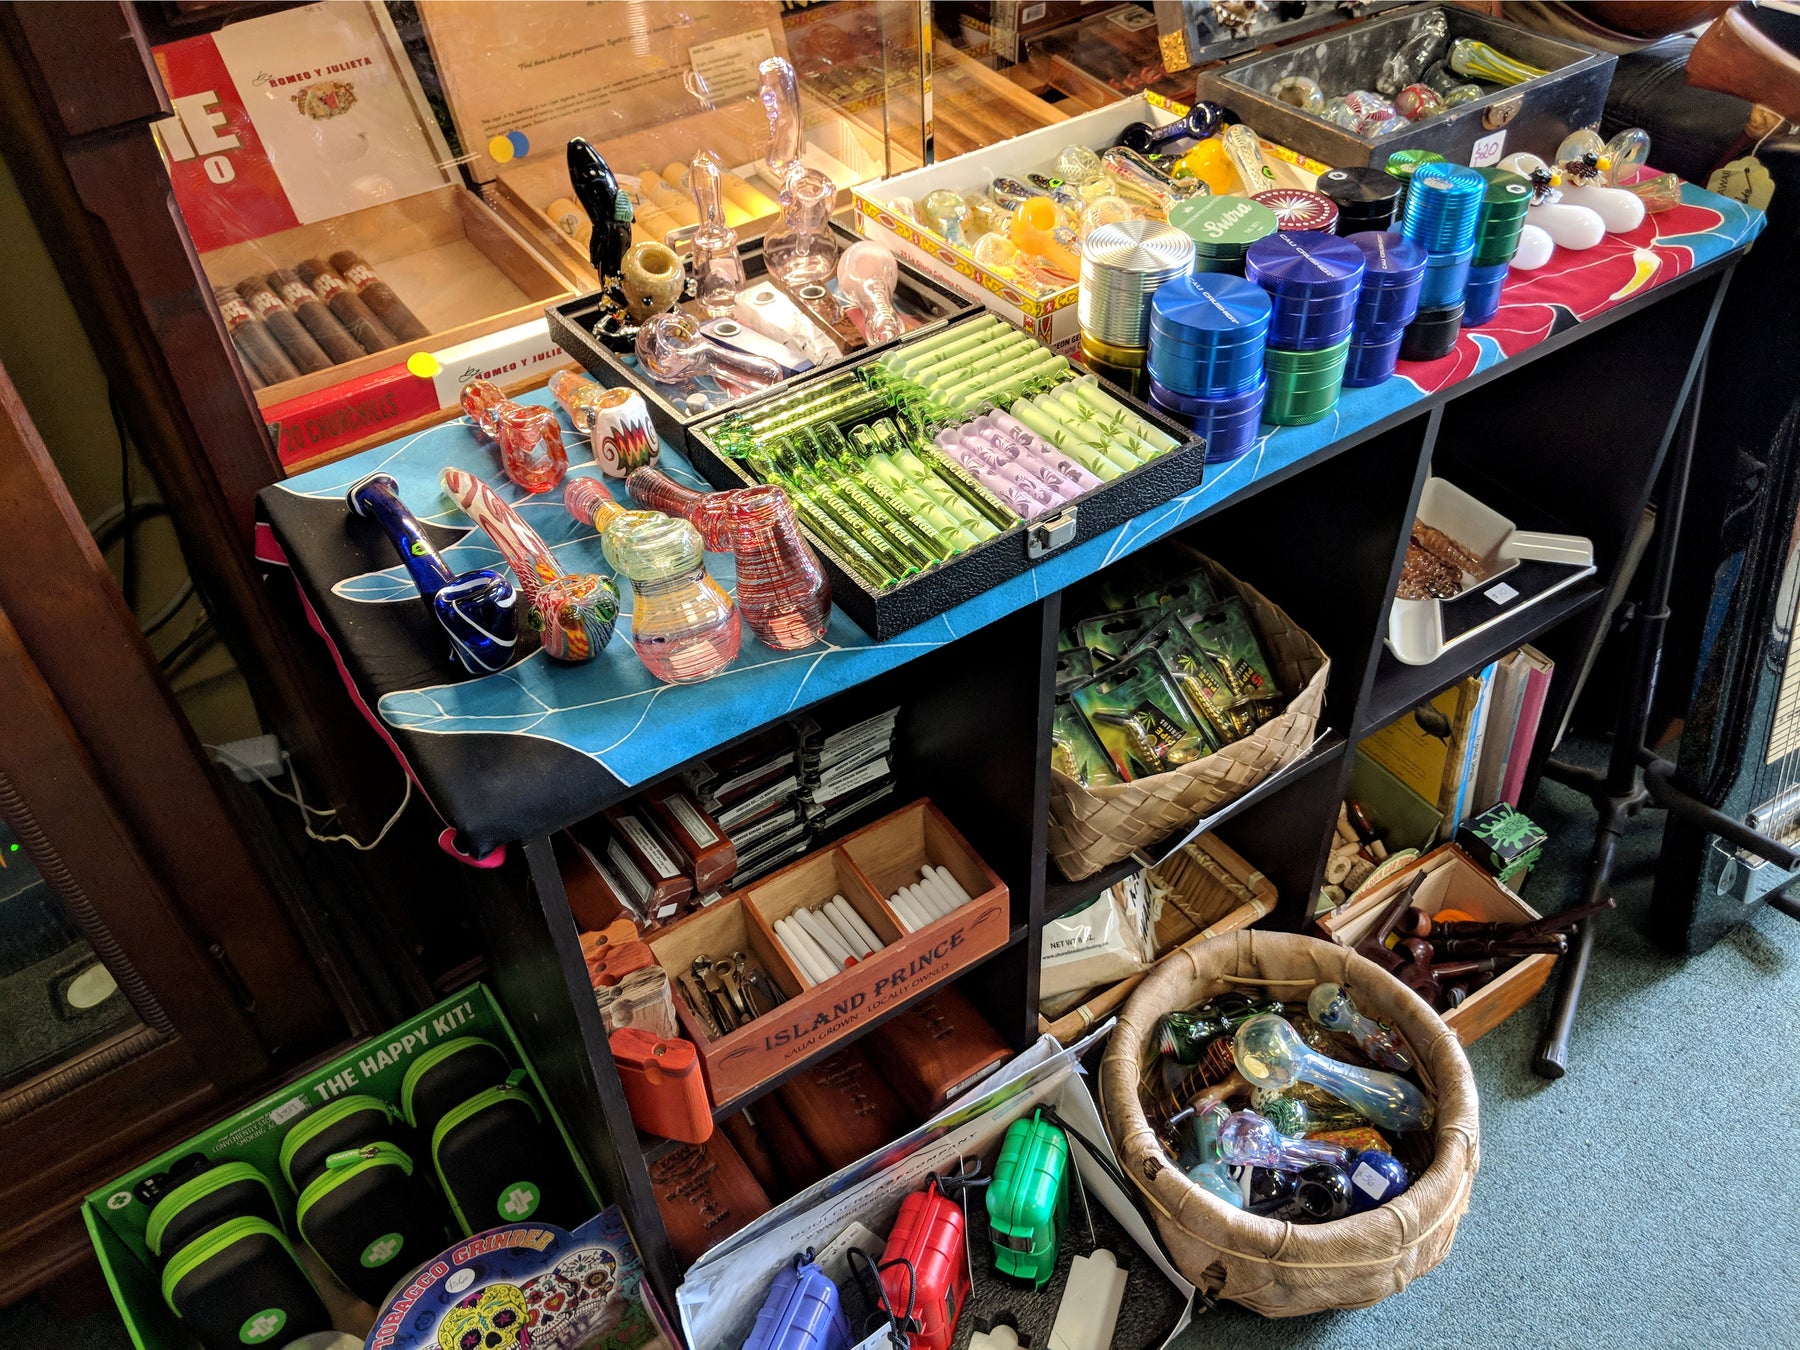 Top 10 Things to Keep Stocked in Your Headshop That are Always in Demand